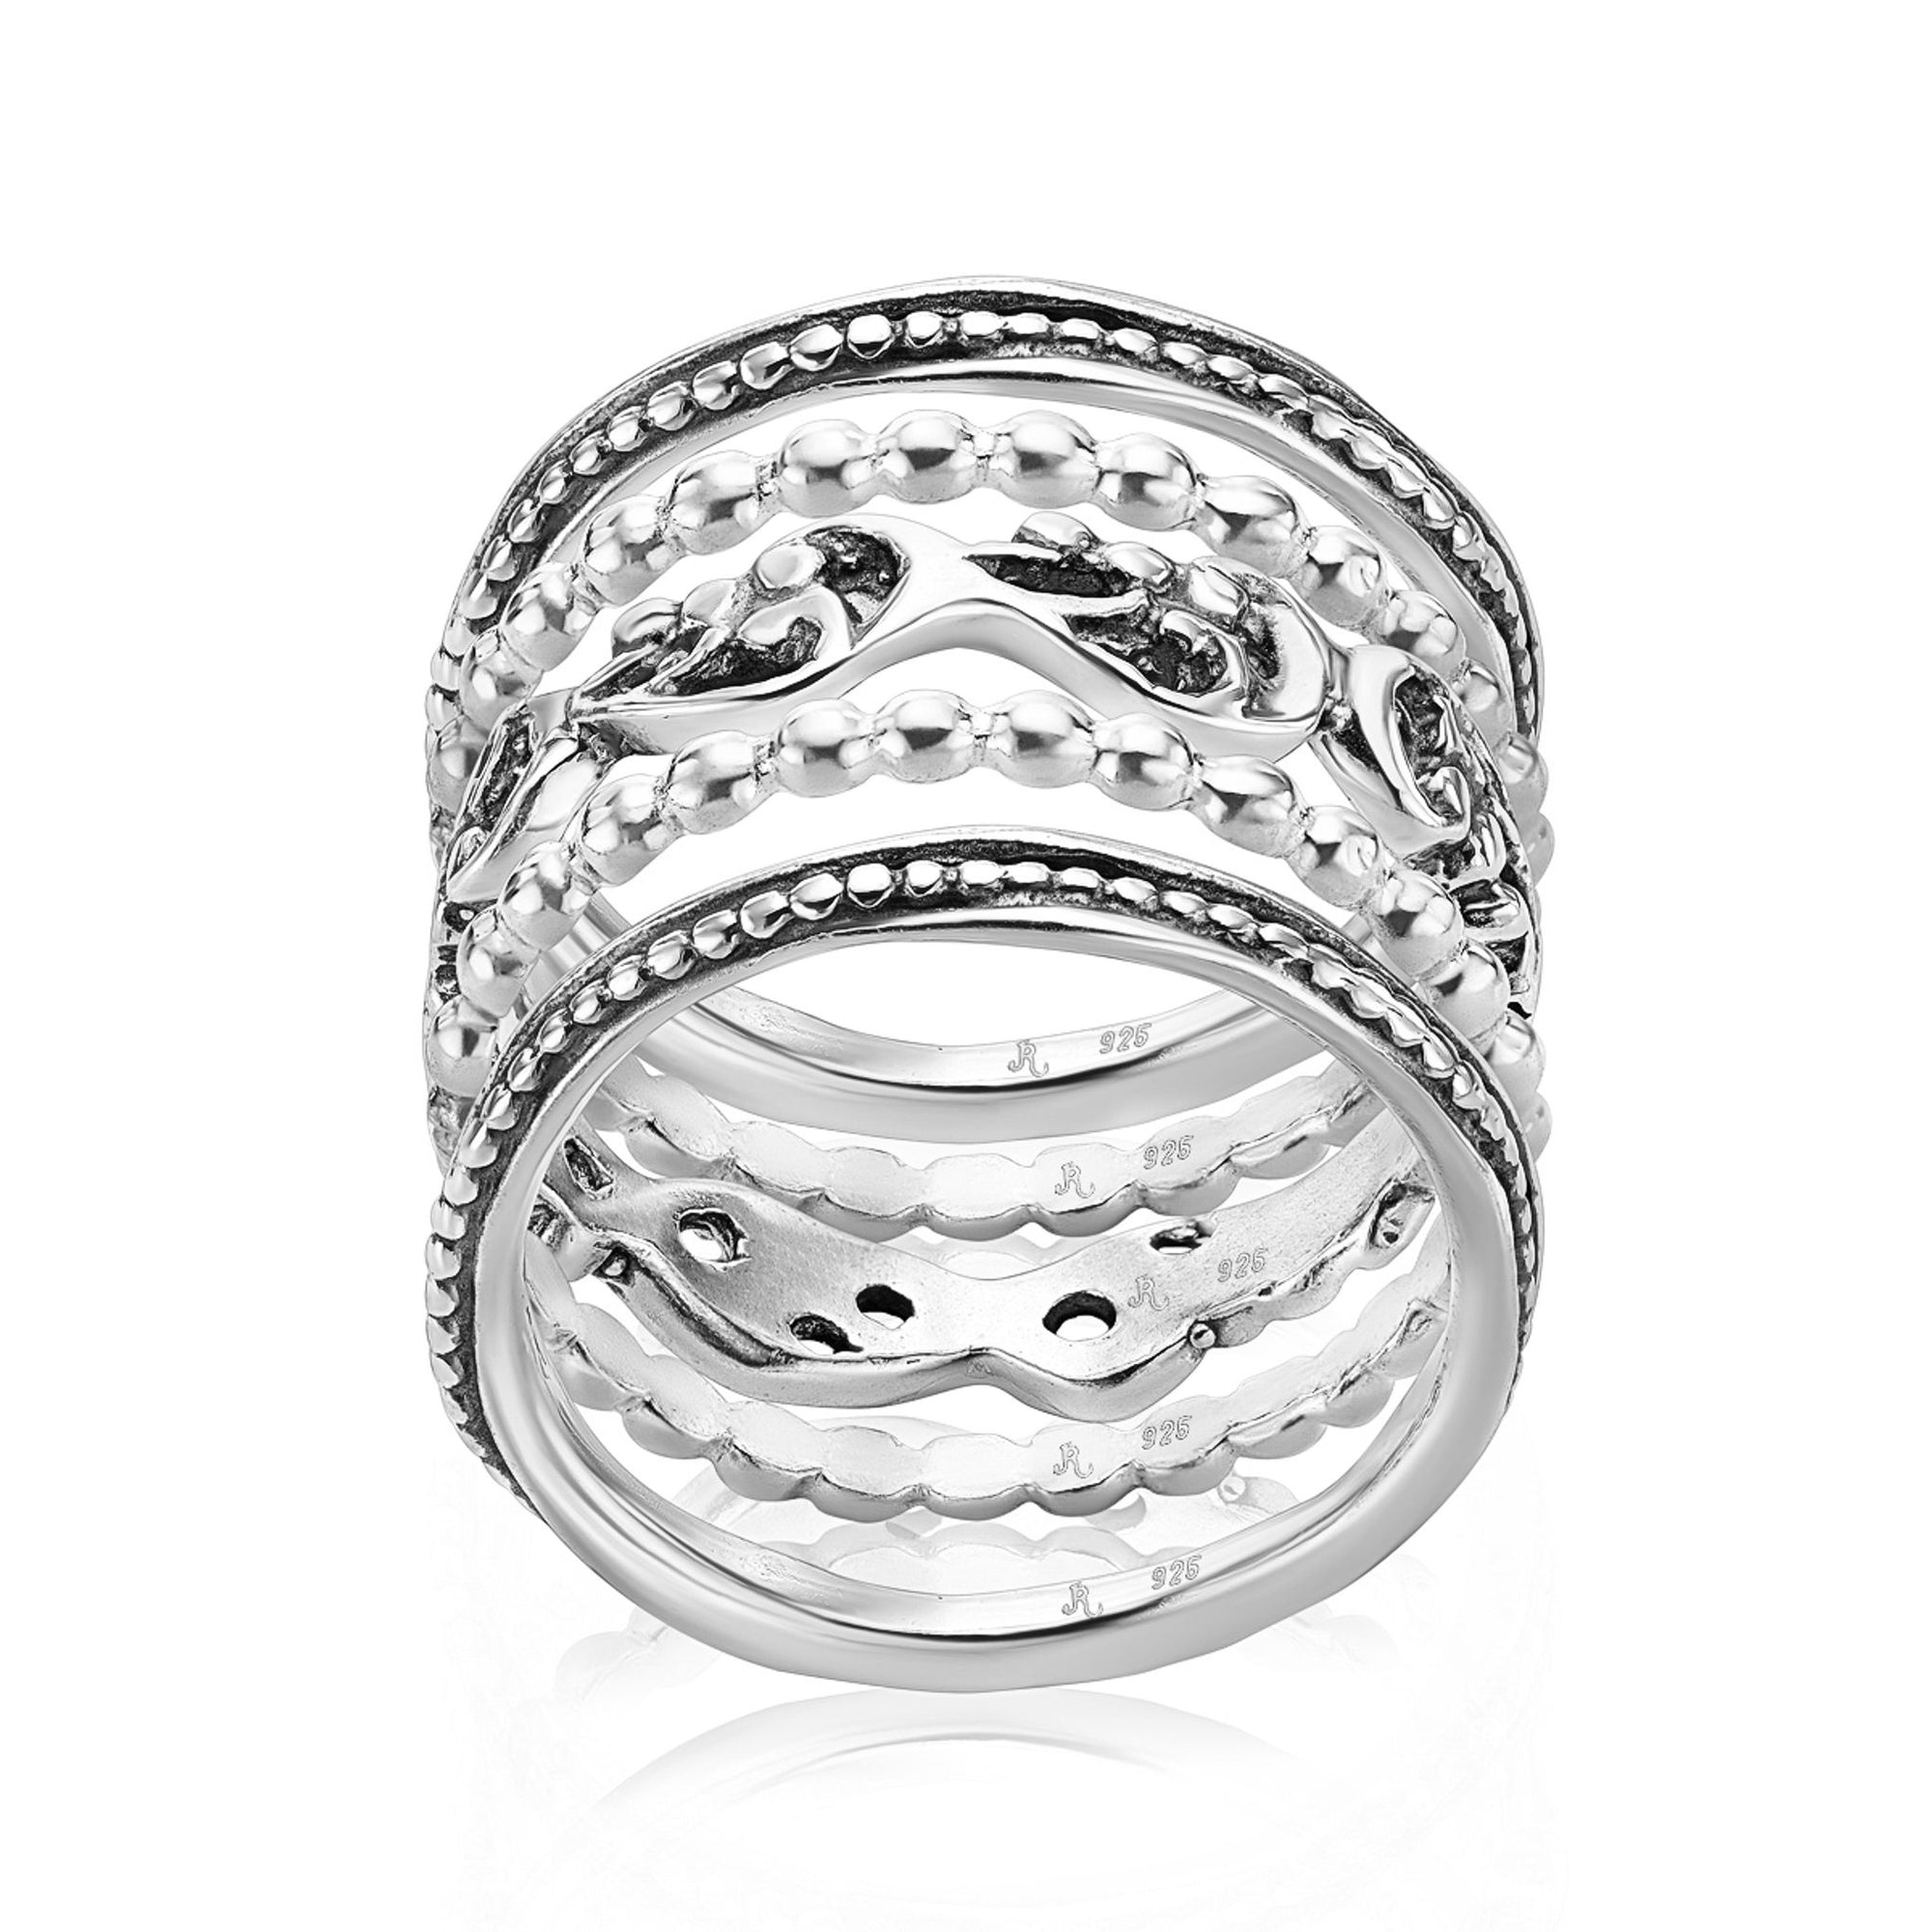 Set of 5 Thin Sterling Silver Stacking Rings